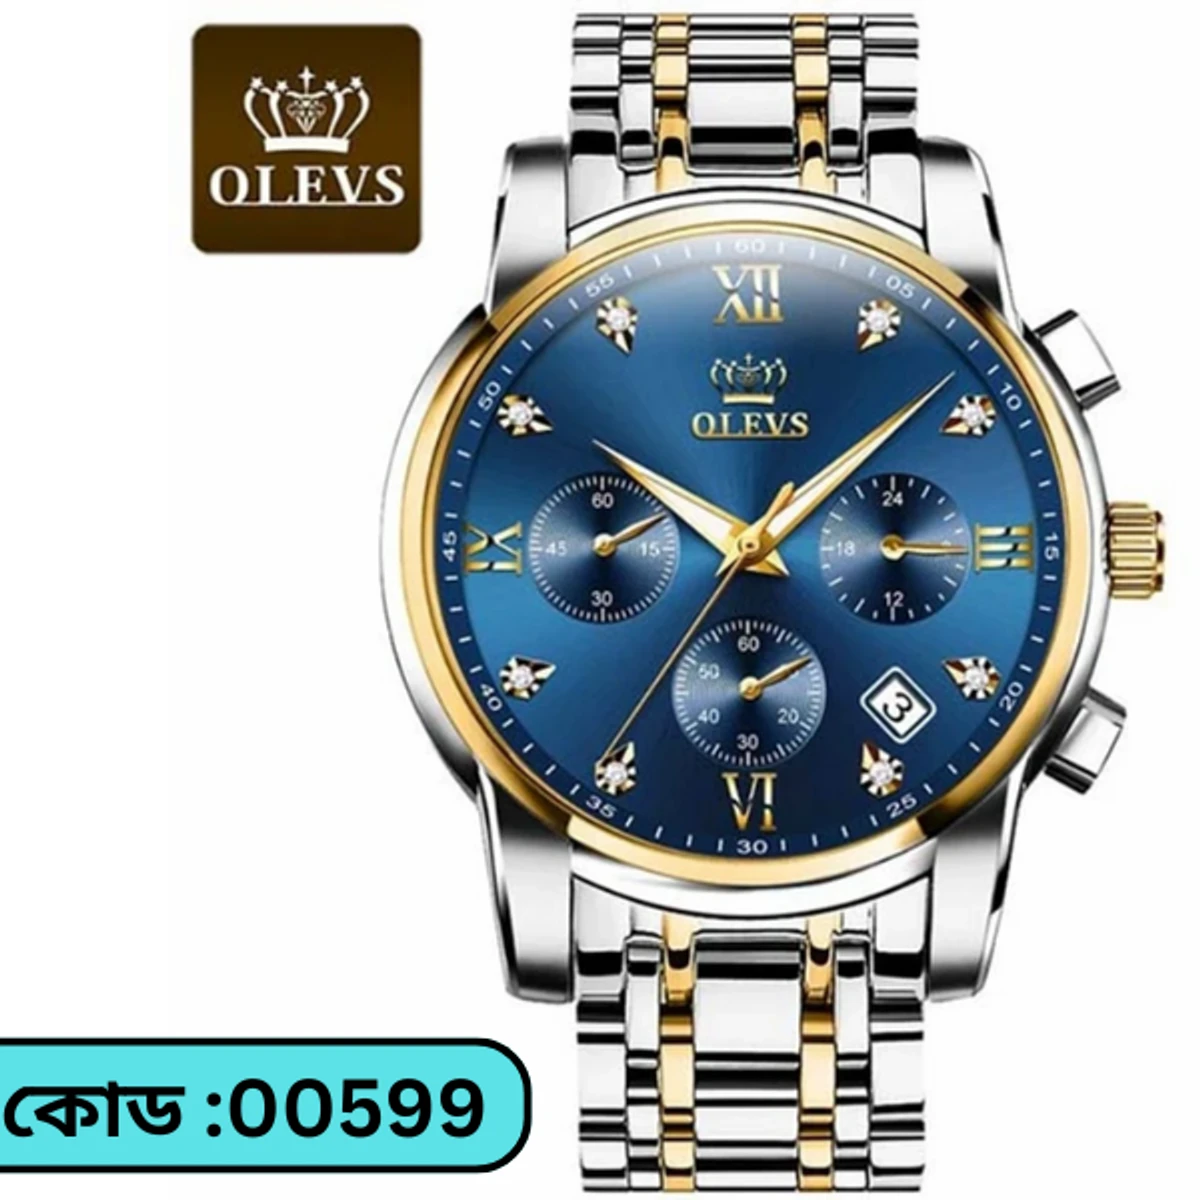 OLEVS MODEL 2858 Watch for Men Stainless Steel Watches - 2858 TOTON AR DIAL BLUE ROUND GOLDEN - MAN WATCH